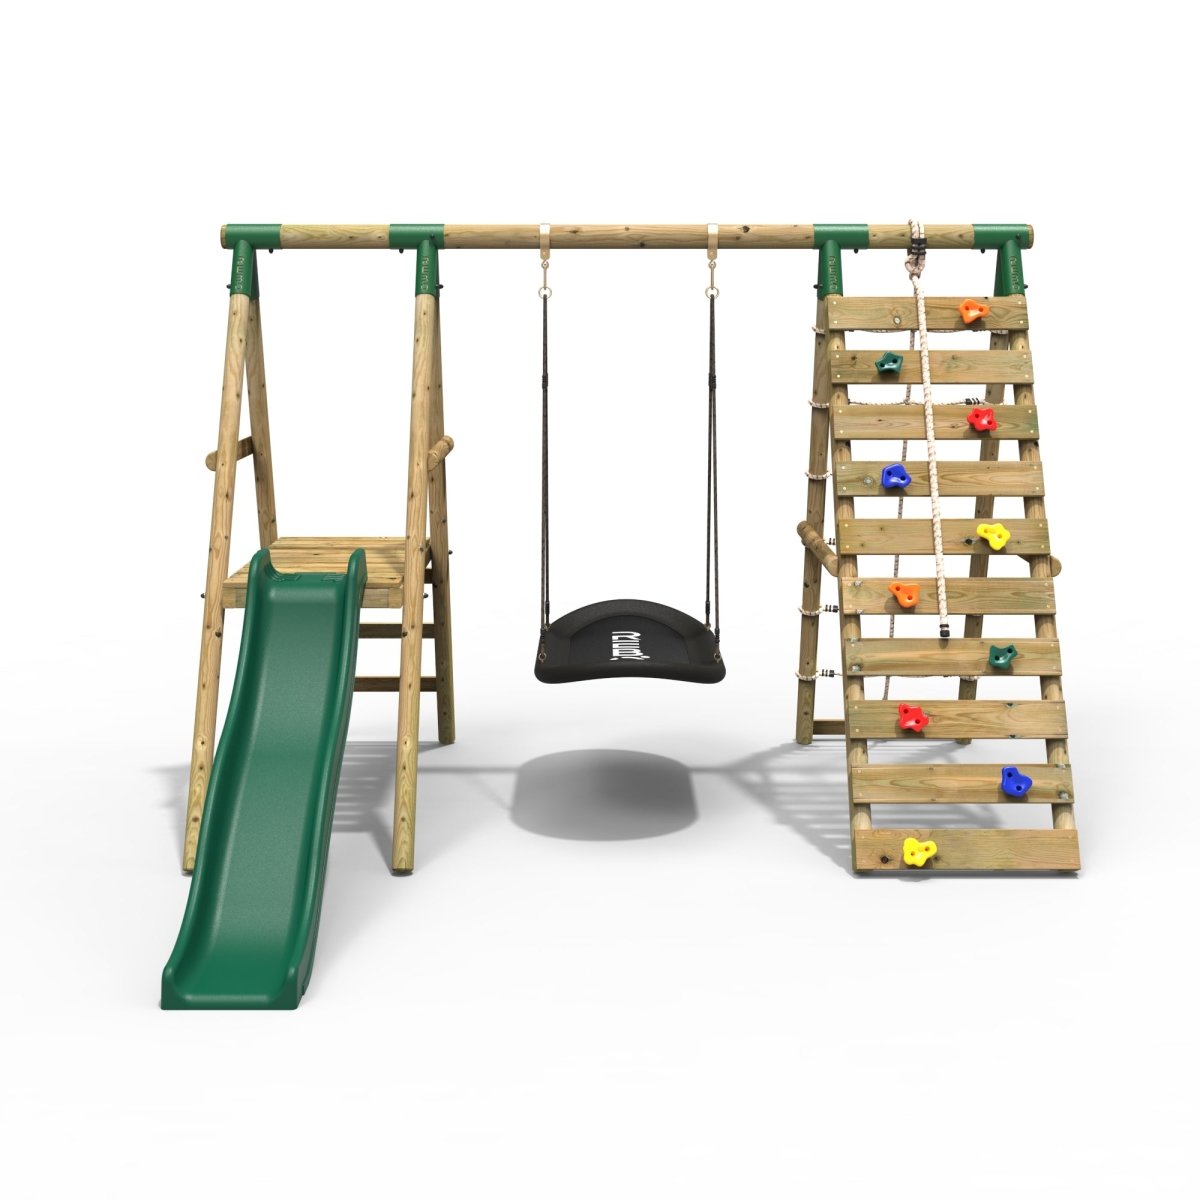 Rebo Wooden Swing Set with Deck and Slide plus Up and Over Climbing Wall - Onyx